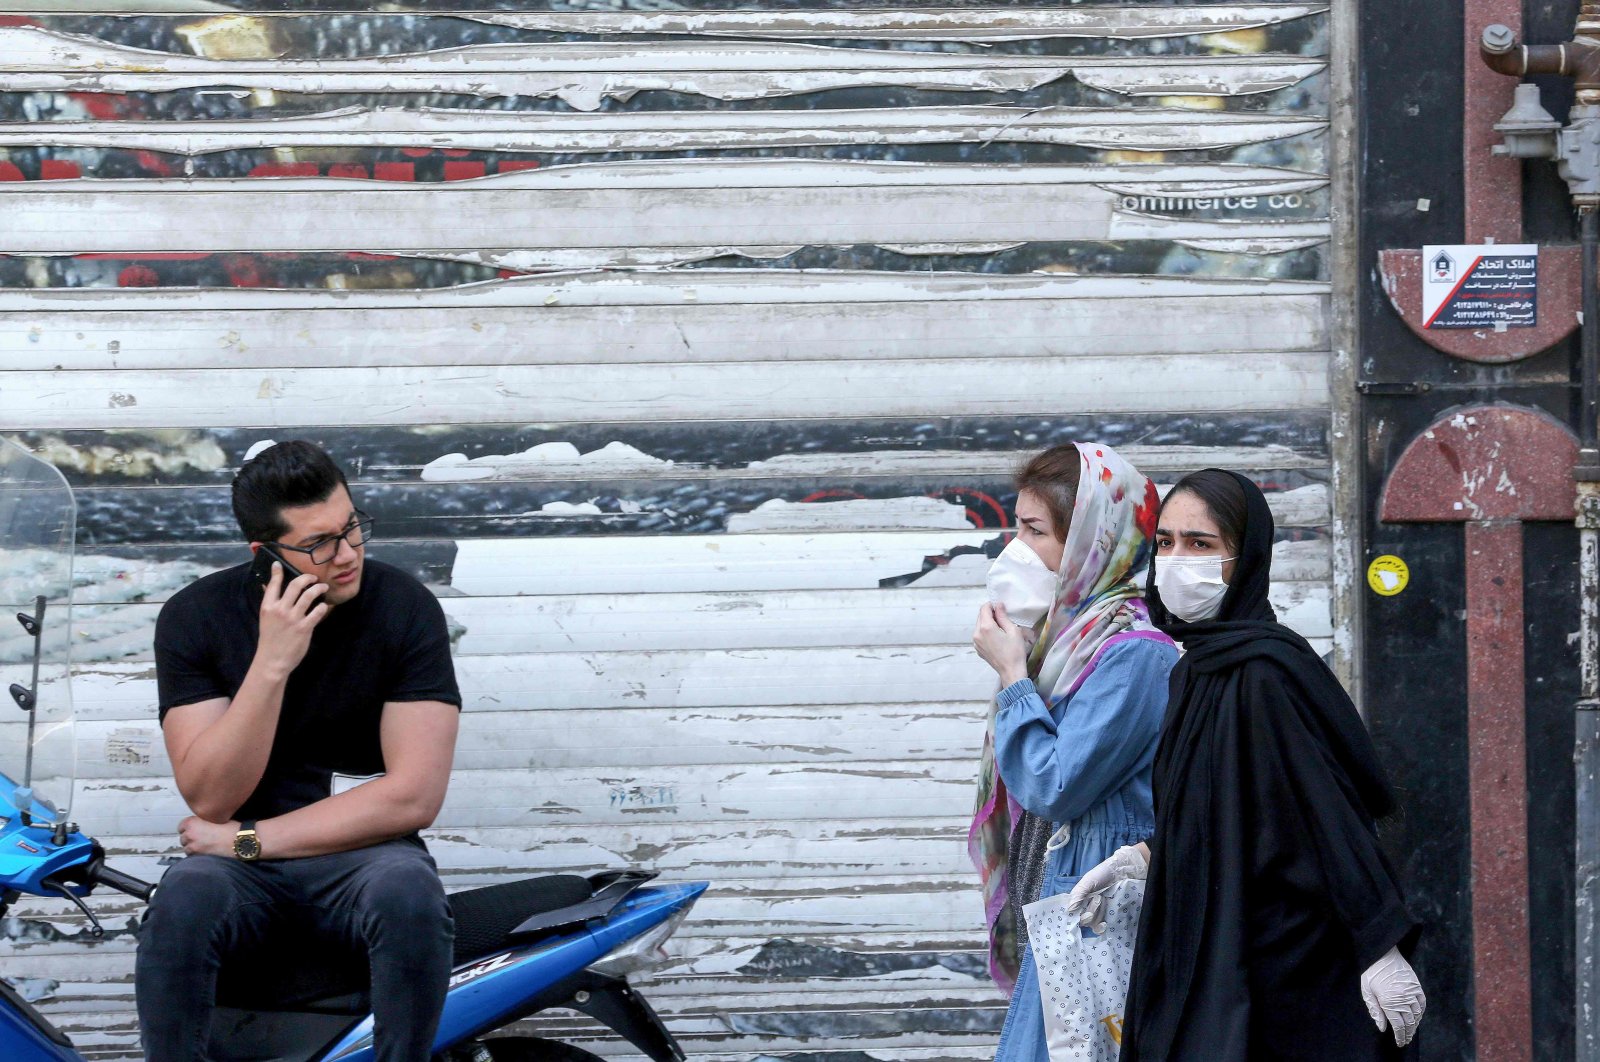 An Iranian youth talks on the phone as he watches women wearing protective masks walk by on a street of the capital Tehran, May 9, 2020. (AFP)